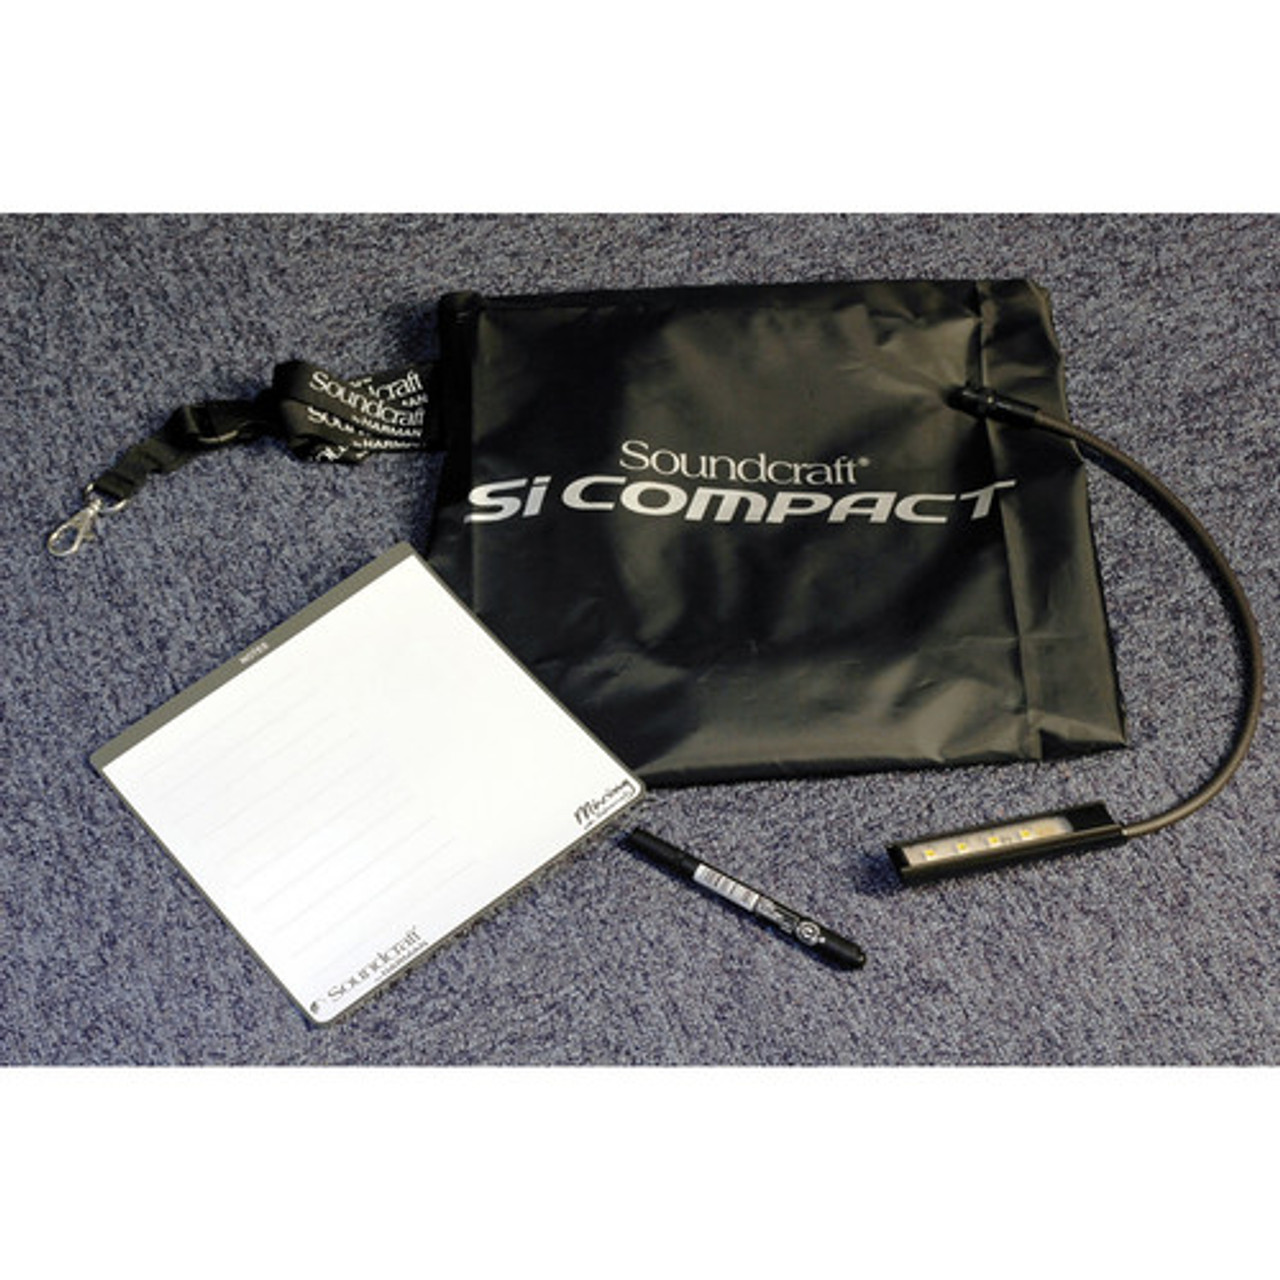 Soundcraft Si Compact Accessory Kit for Si Compact 24 Console (BF10.522002)